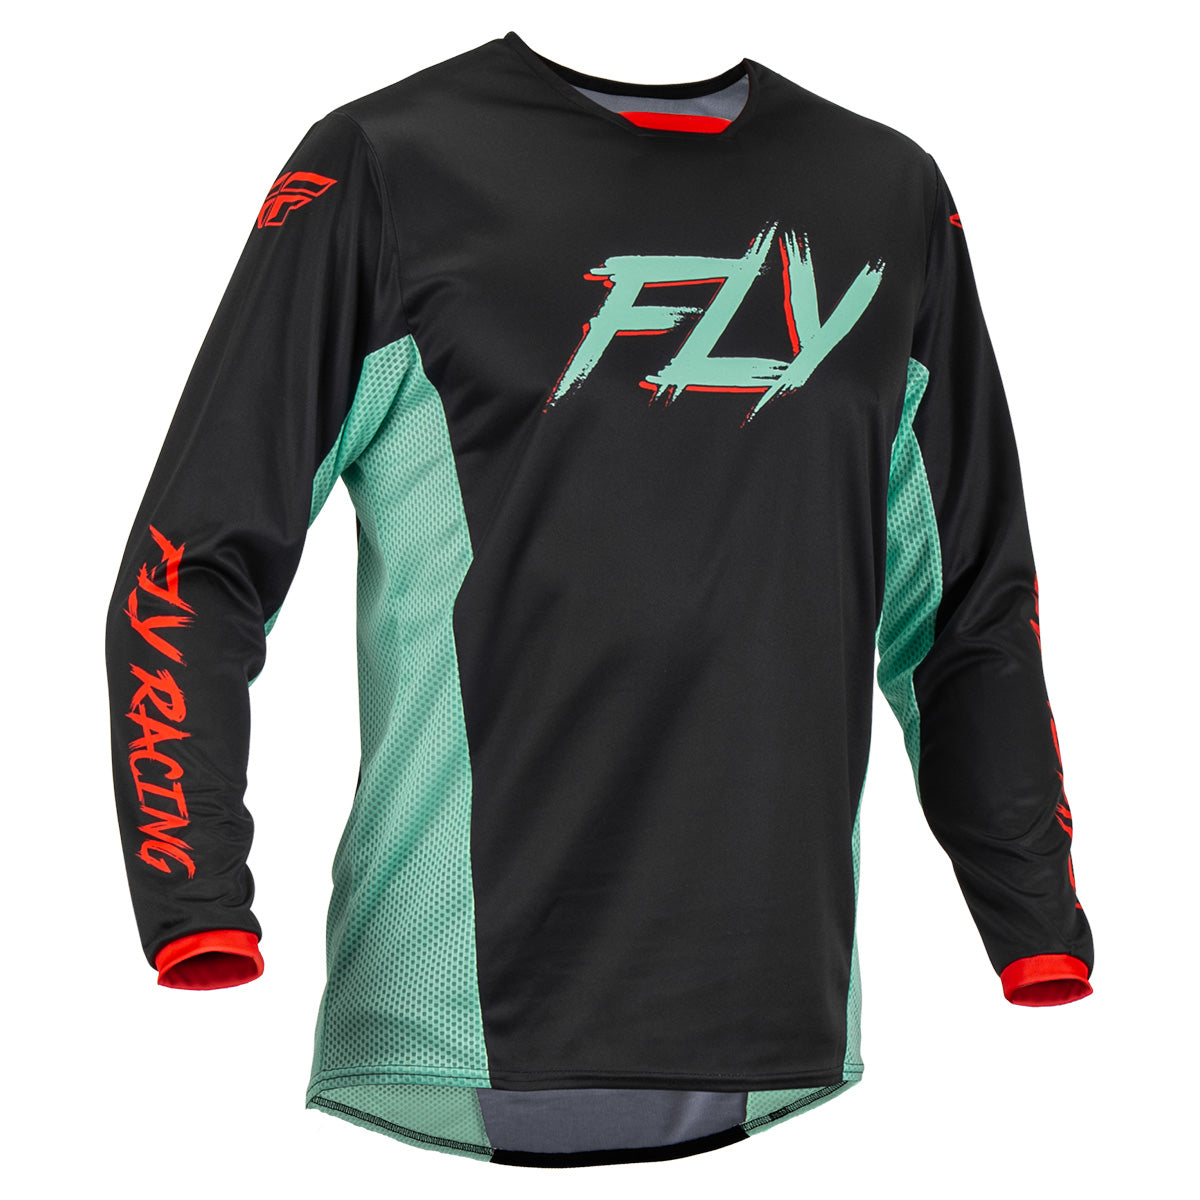 FLY Racing Men's Kinetic S.E. Rave - Black/Mint/Red 376-524S